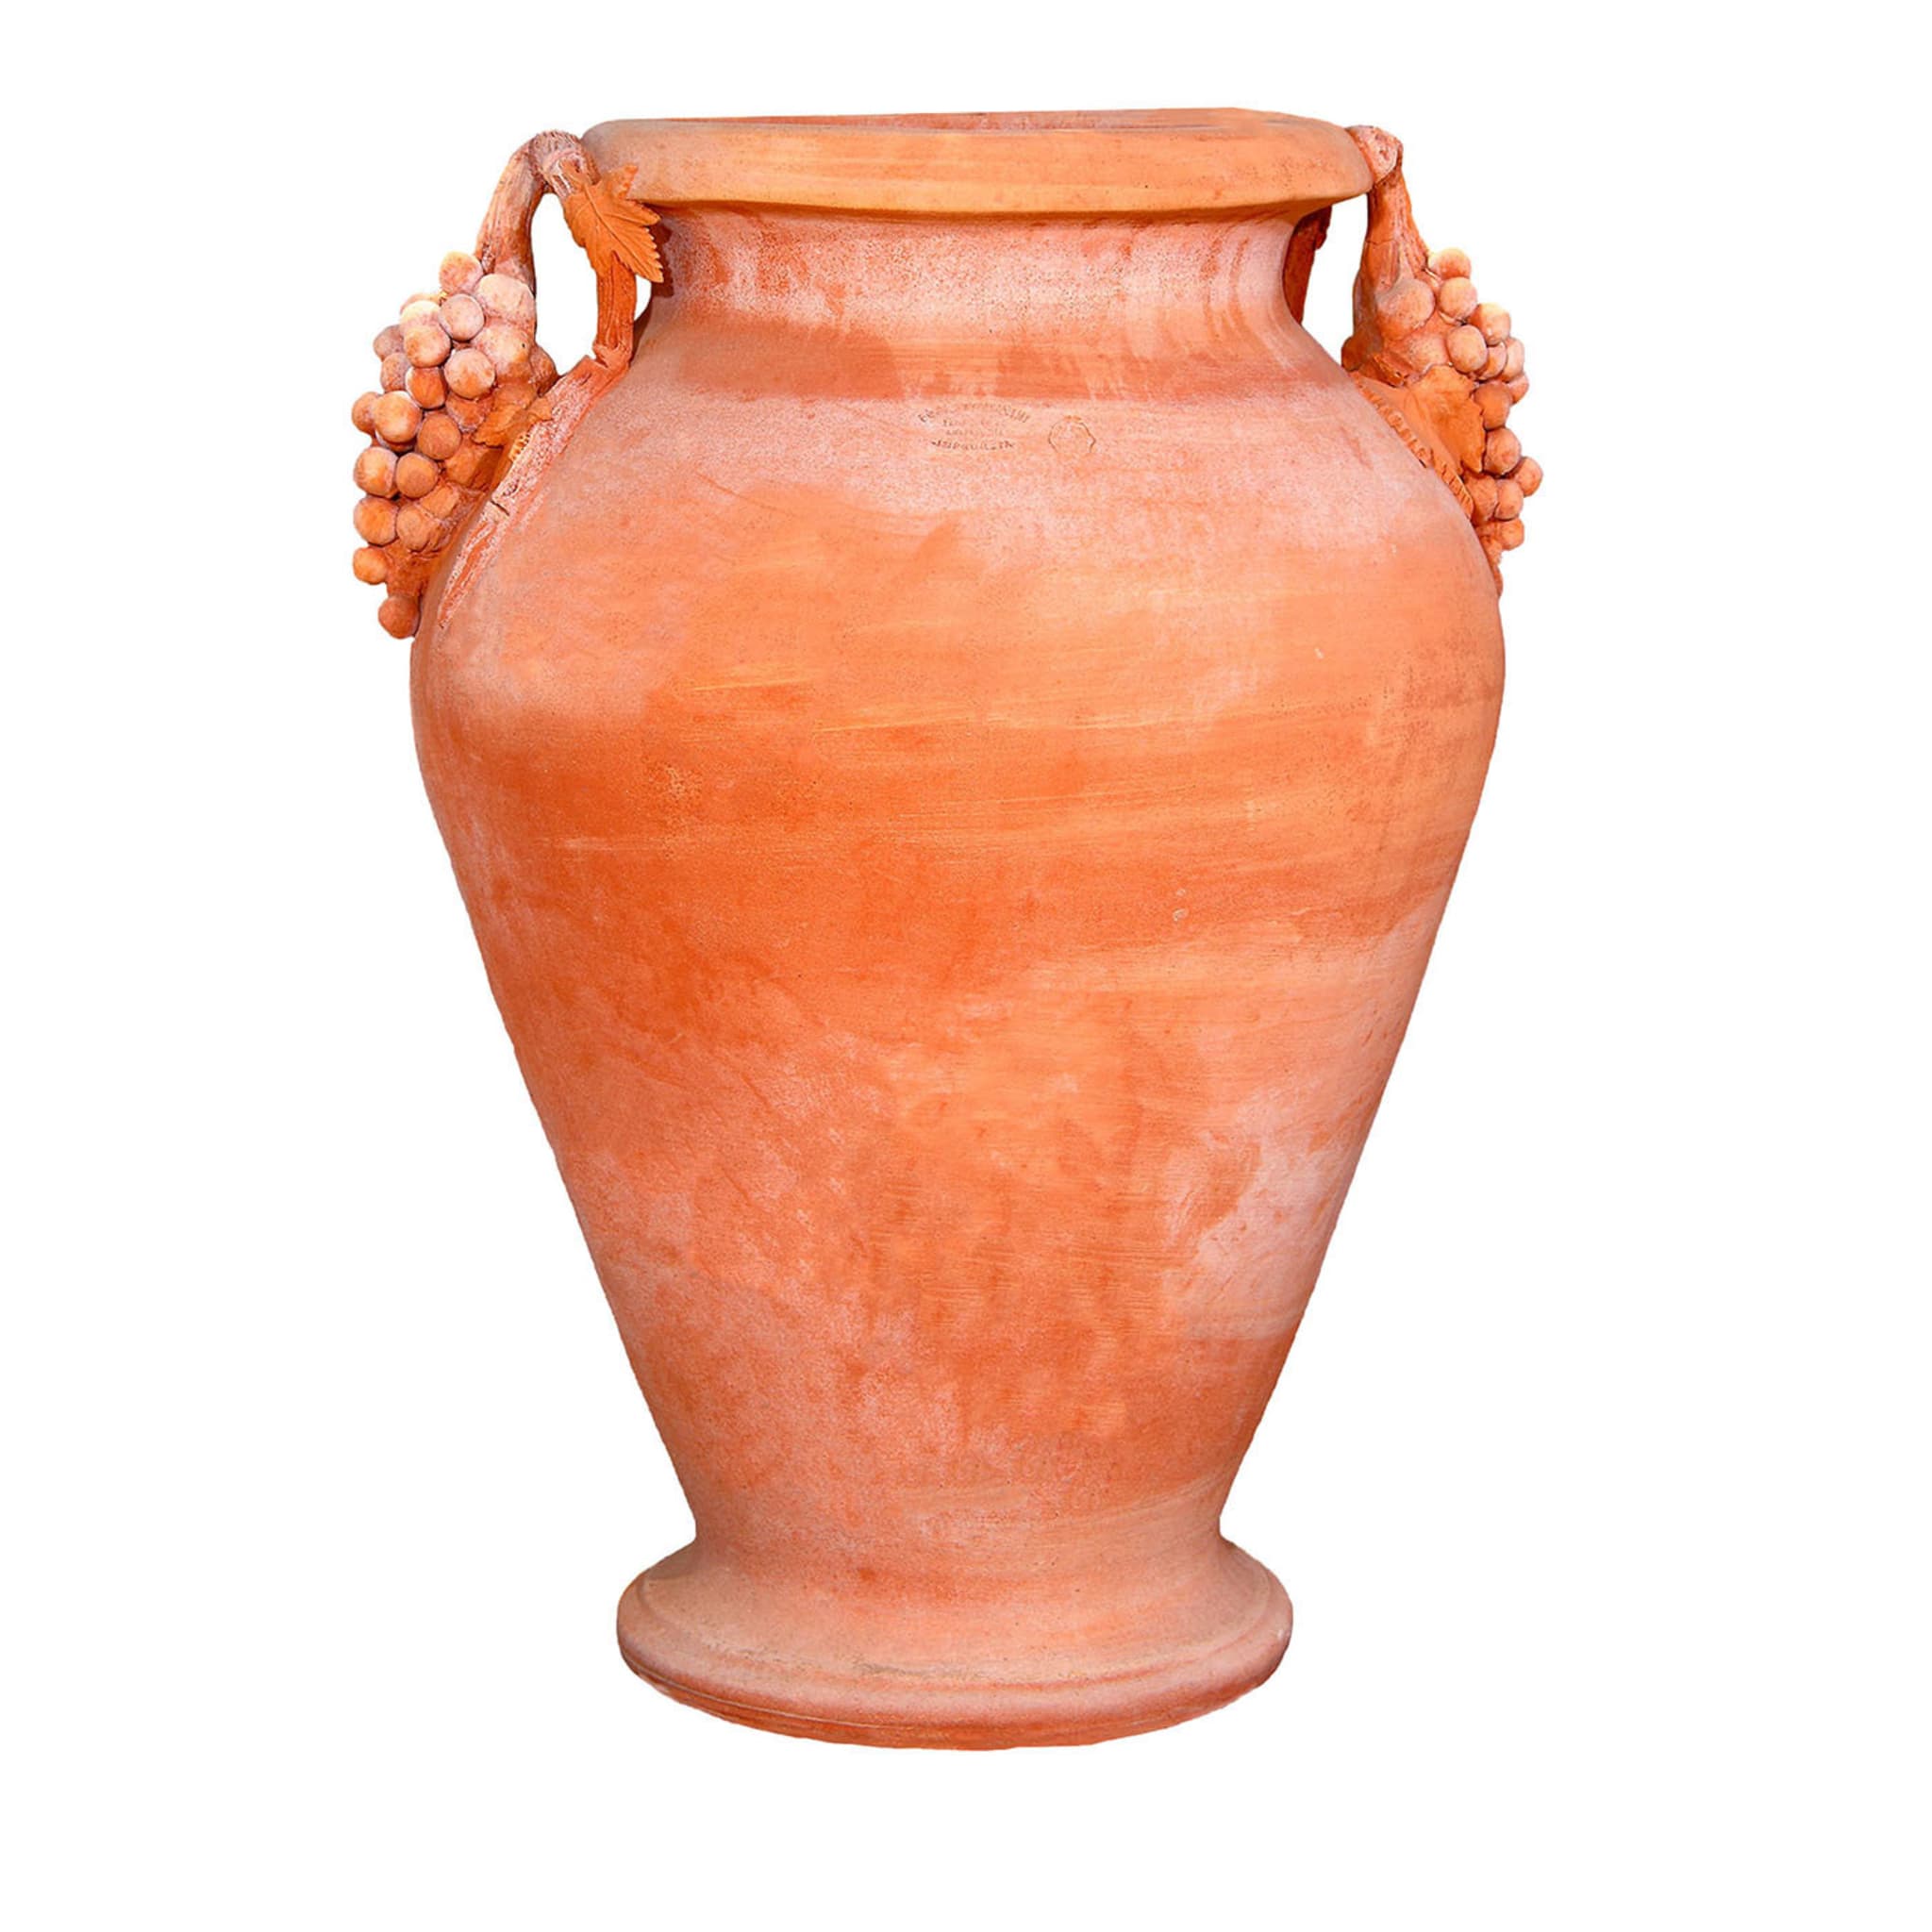 Amphora with Grape-Shaped Handles - Main view